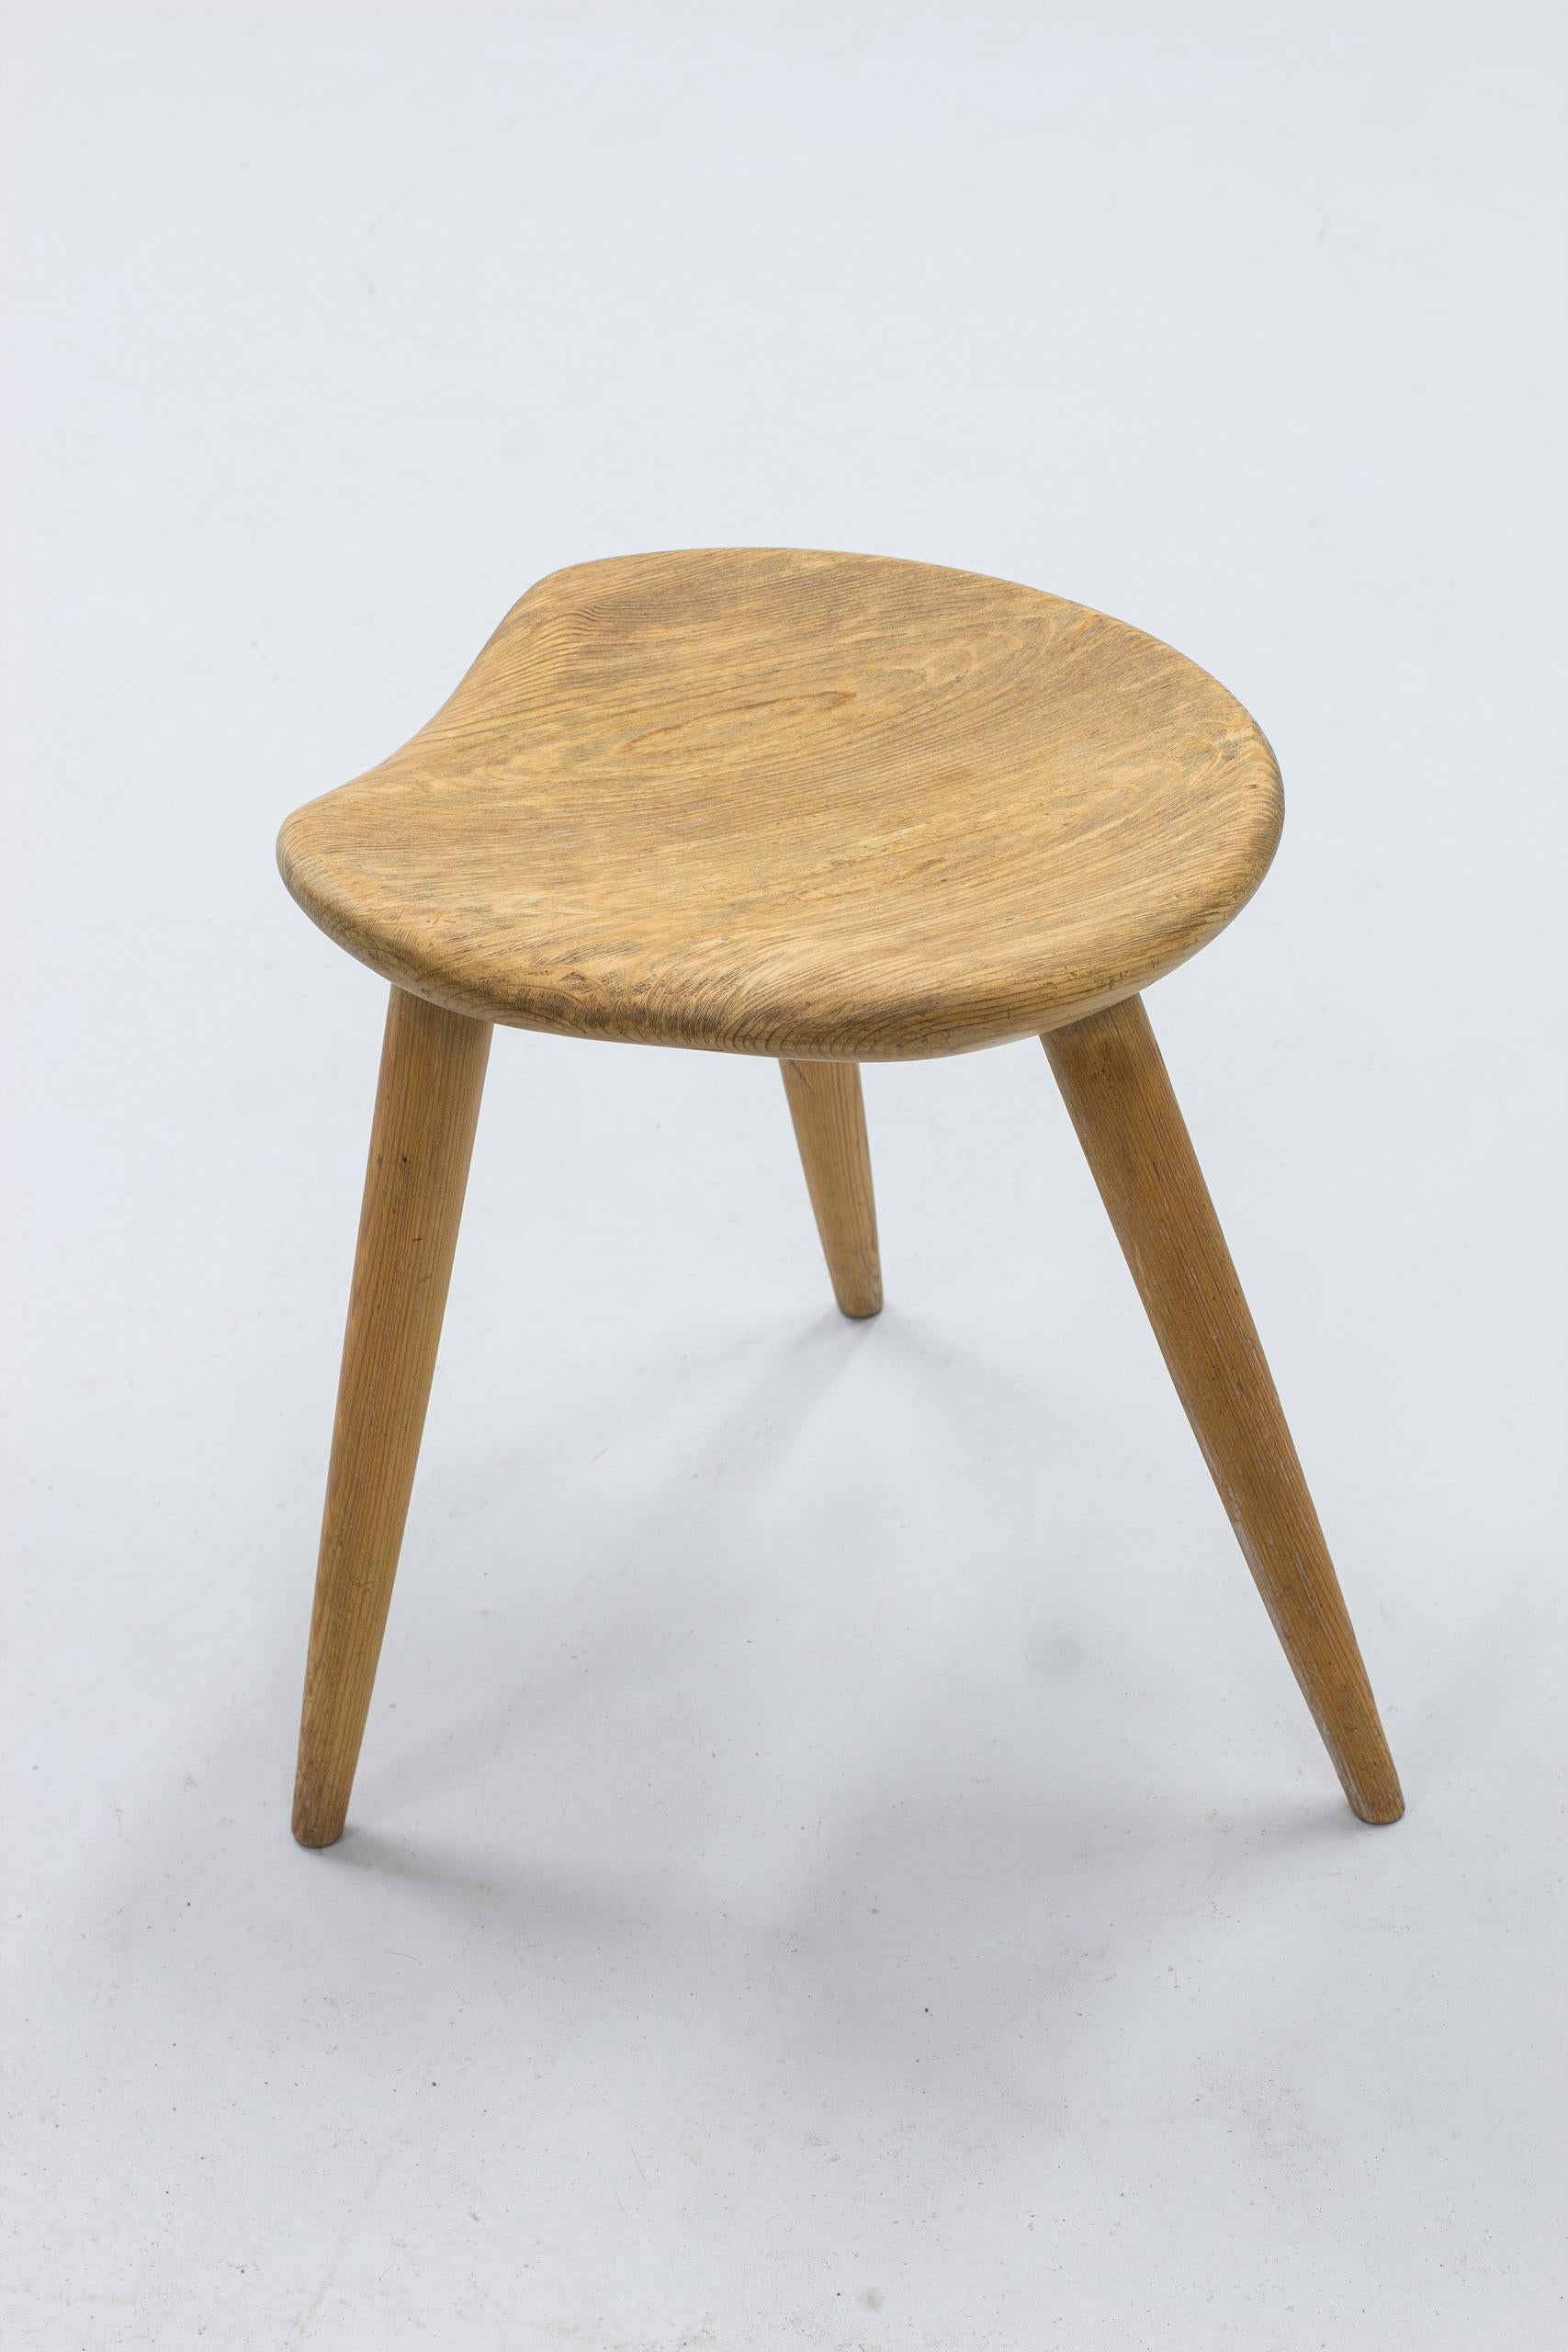 Scandinavian Modern Sportstuge Stool in Solid Pine Made in Norway by Norsk Husflid, circa 1950s For Sale